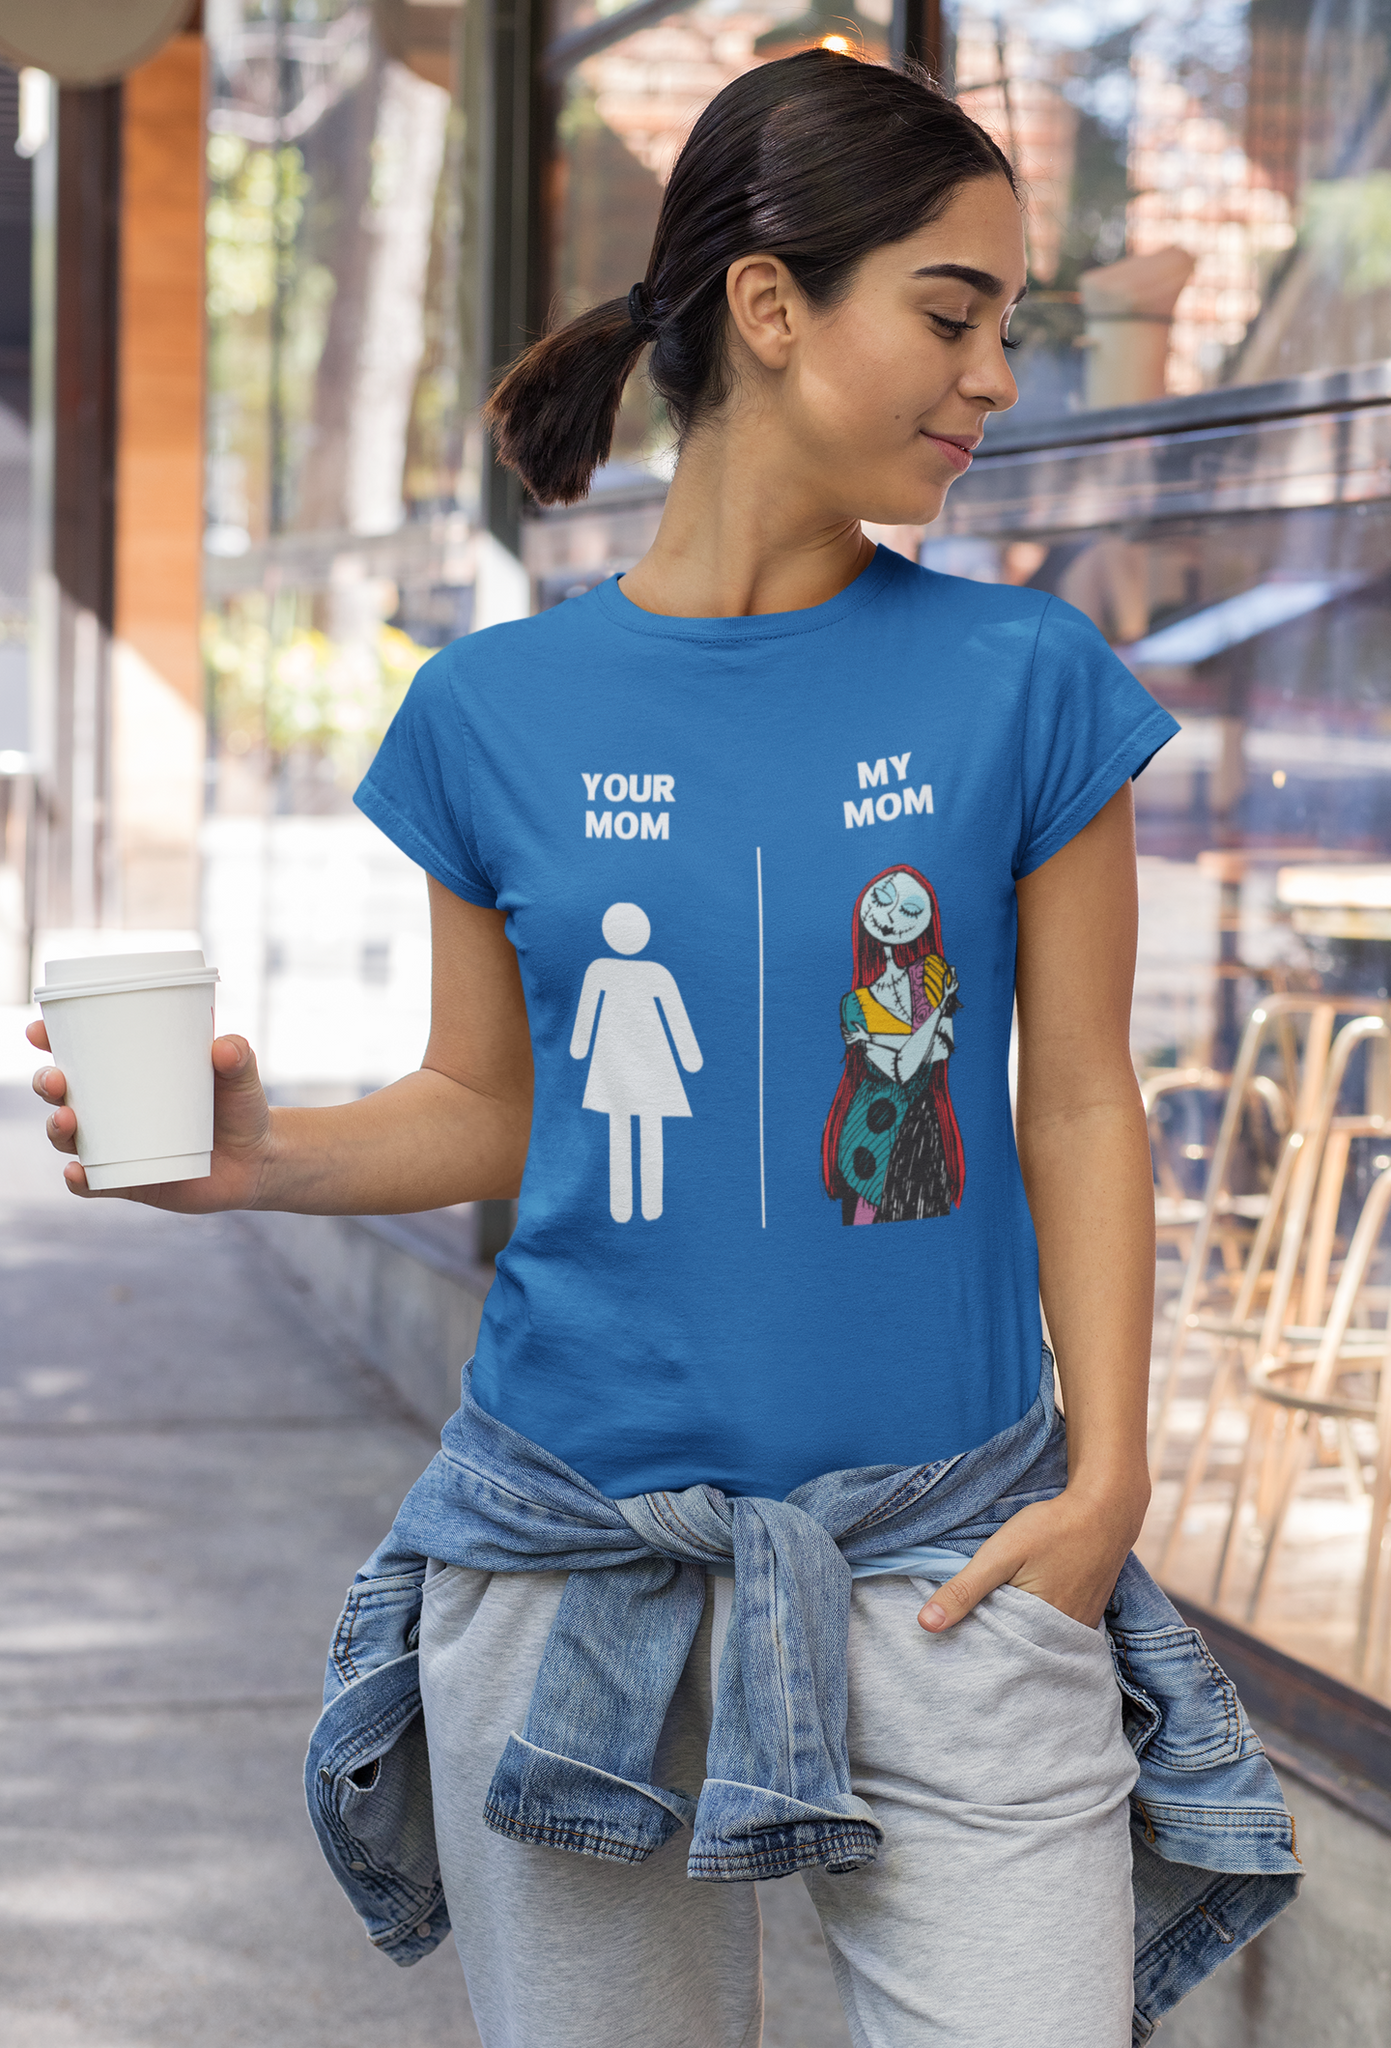 Nightmare Before Christmas T Shirt, Sally T Shirt, Your Mom My Mom Tshirt, Mothers Day Gifts